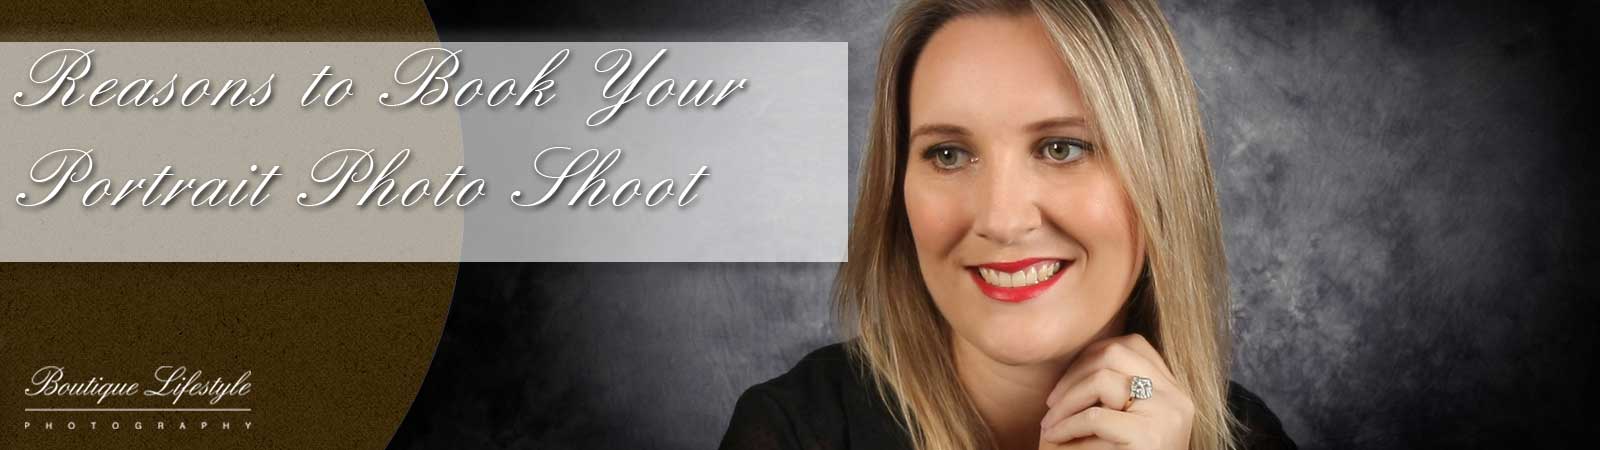 Nine Reasons to Book your Portrait Photo Shoot